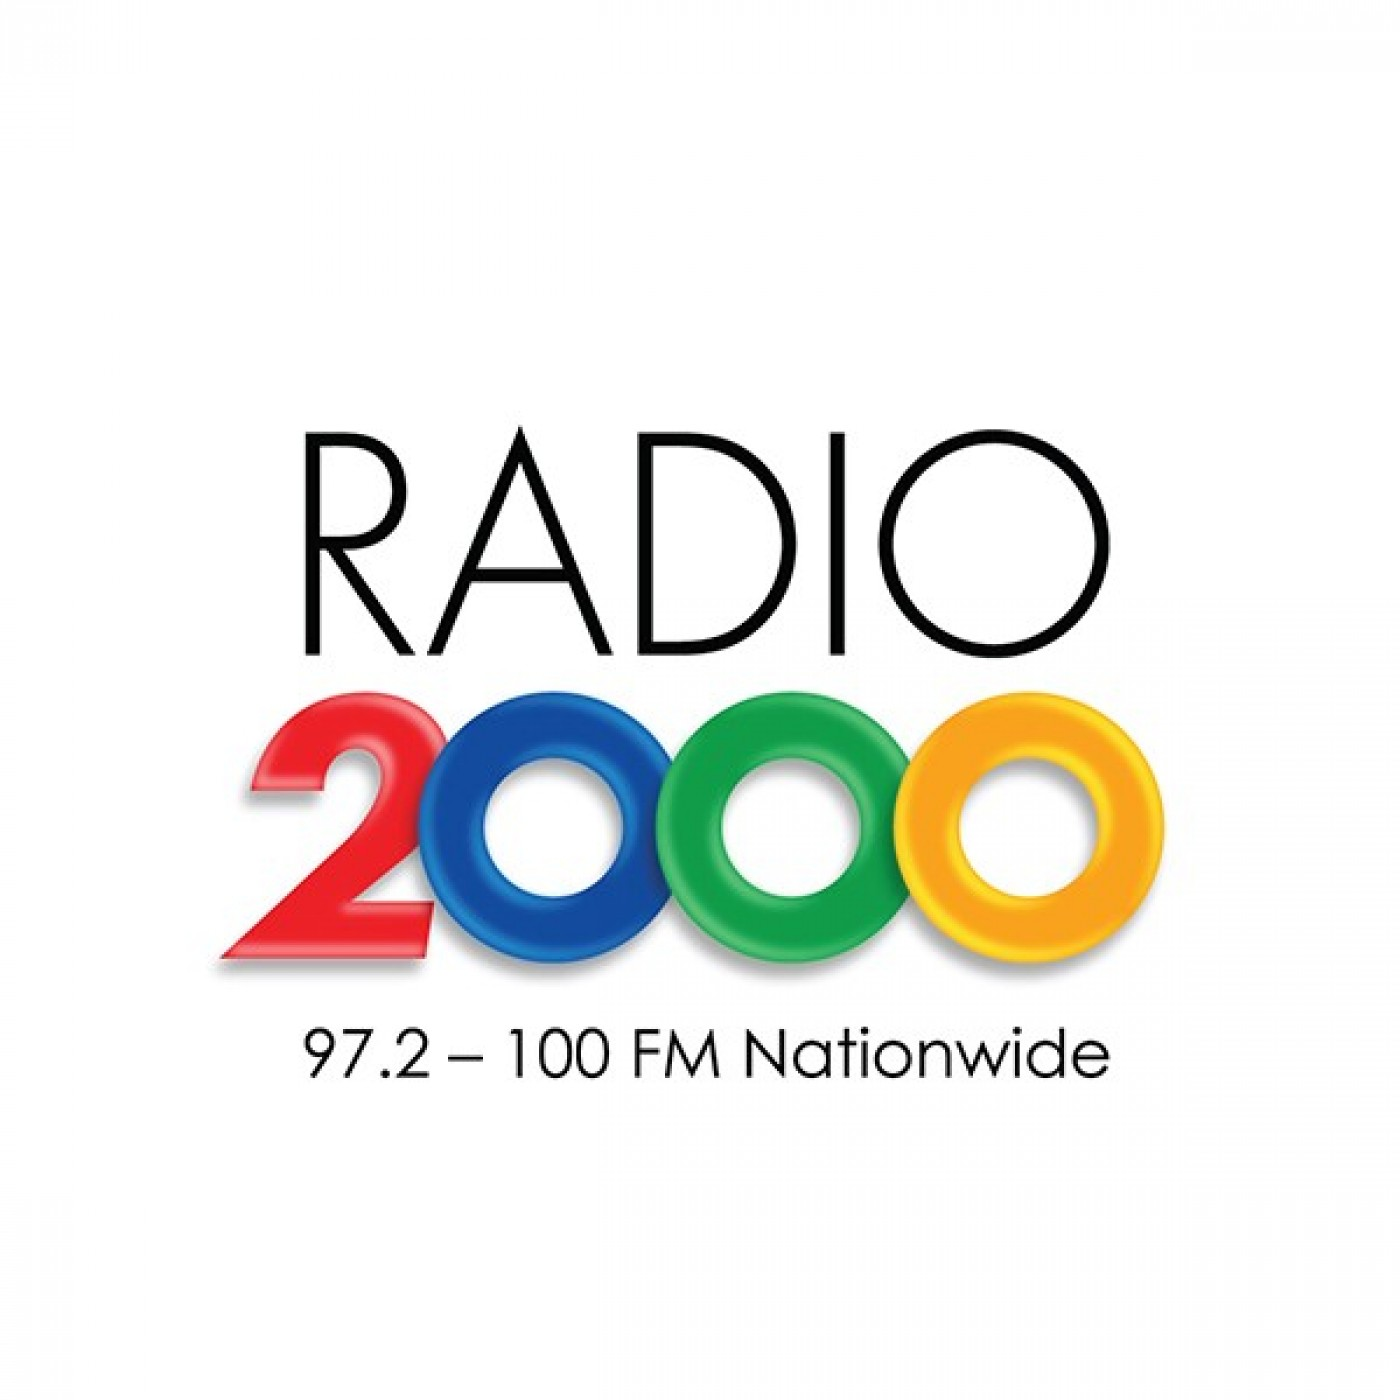 RADIO 2000 IN THE MIX #AIMNOT2SWEAT MIXED BY DJ MILES 01-05-2020 22H00-22H20